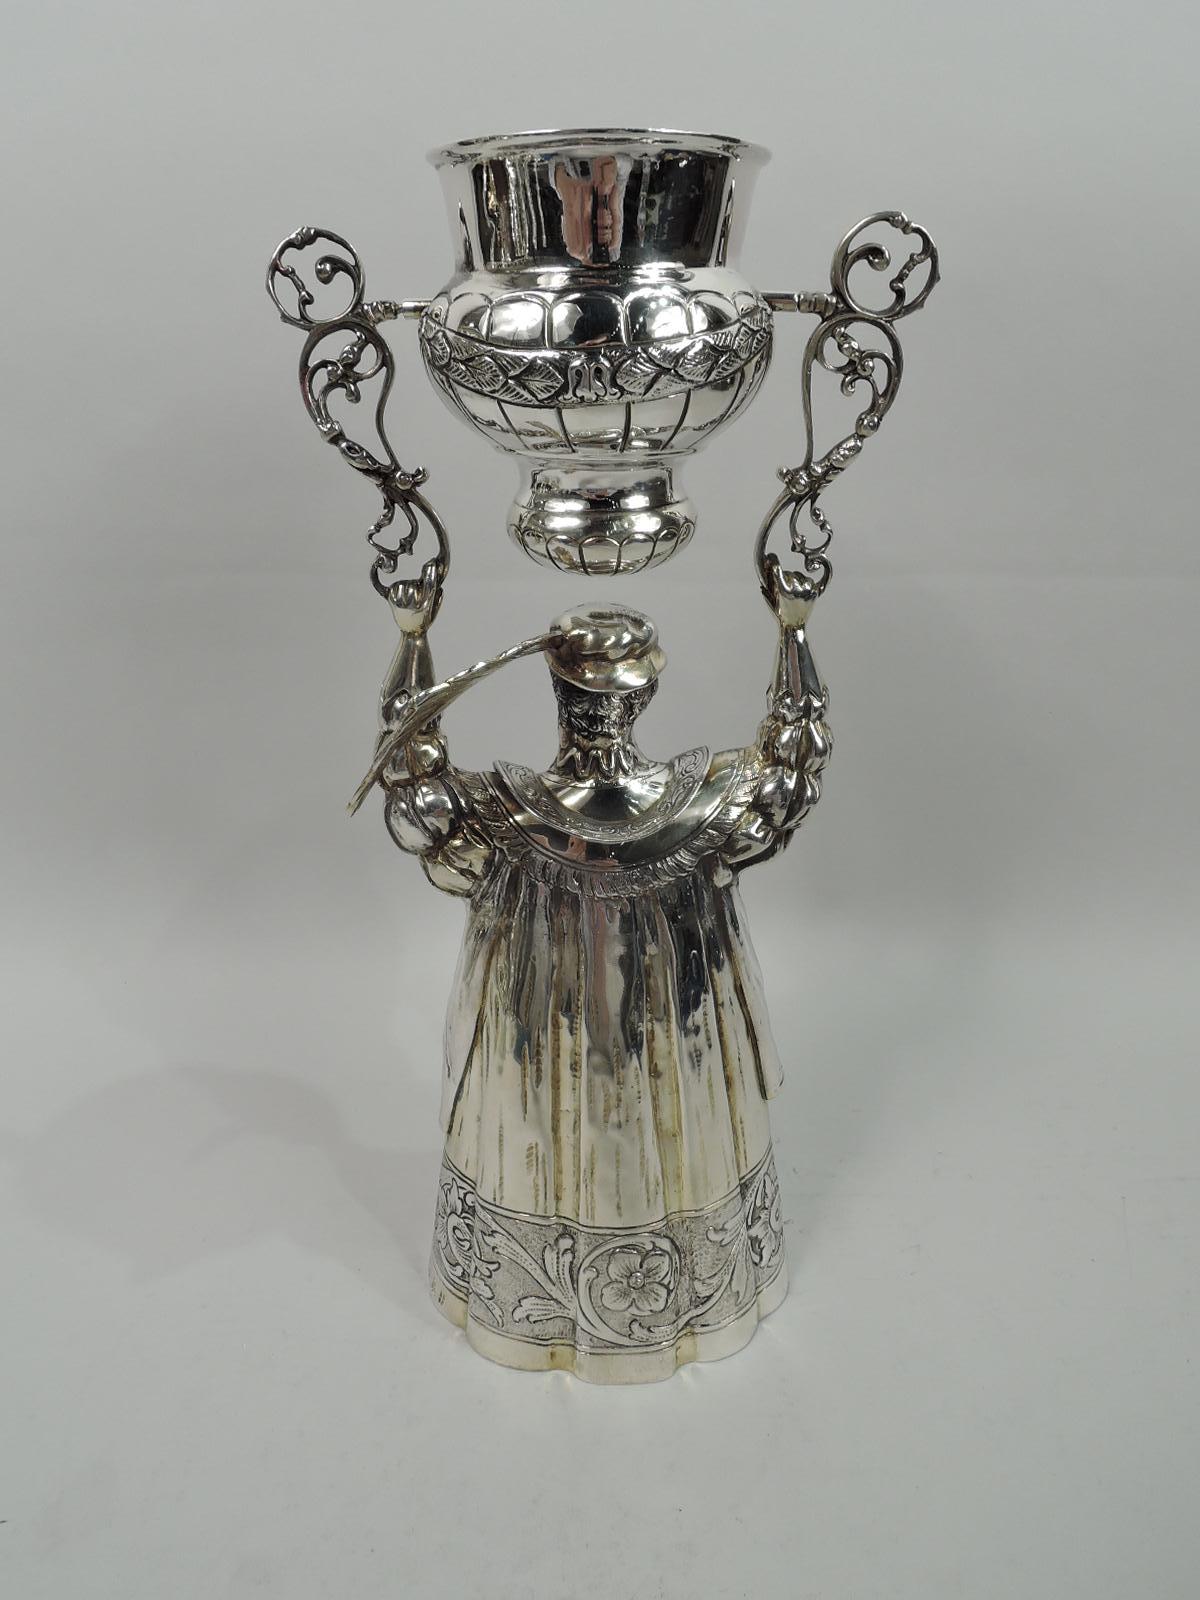 German parcel gilt sterling silver male figural wedding cup, ca 1920. A 16th-century grandee with feathered cap holds aloft a bellied cup swing-mounted to scroll brackets. His robe with neat folds and flowering scroll border forms the second cup.